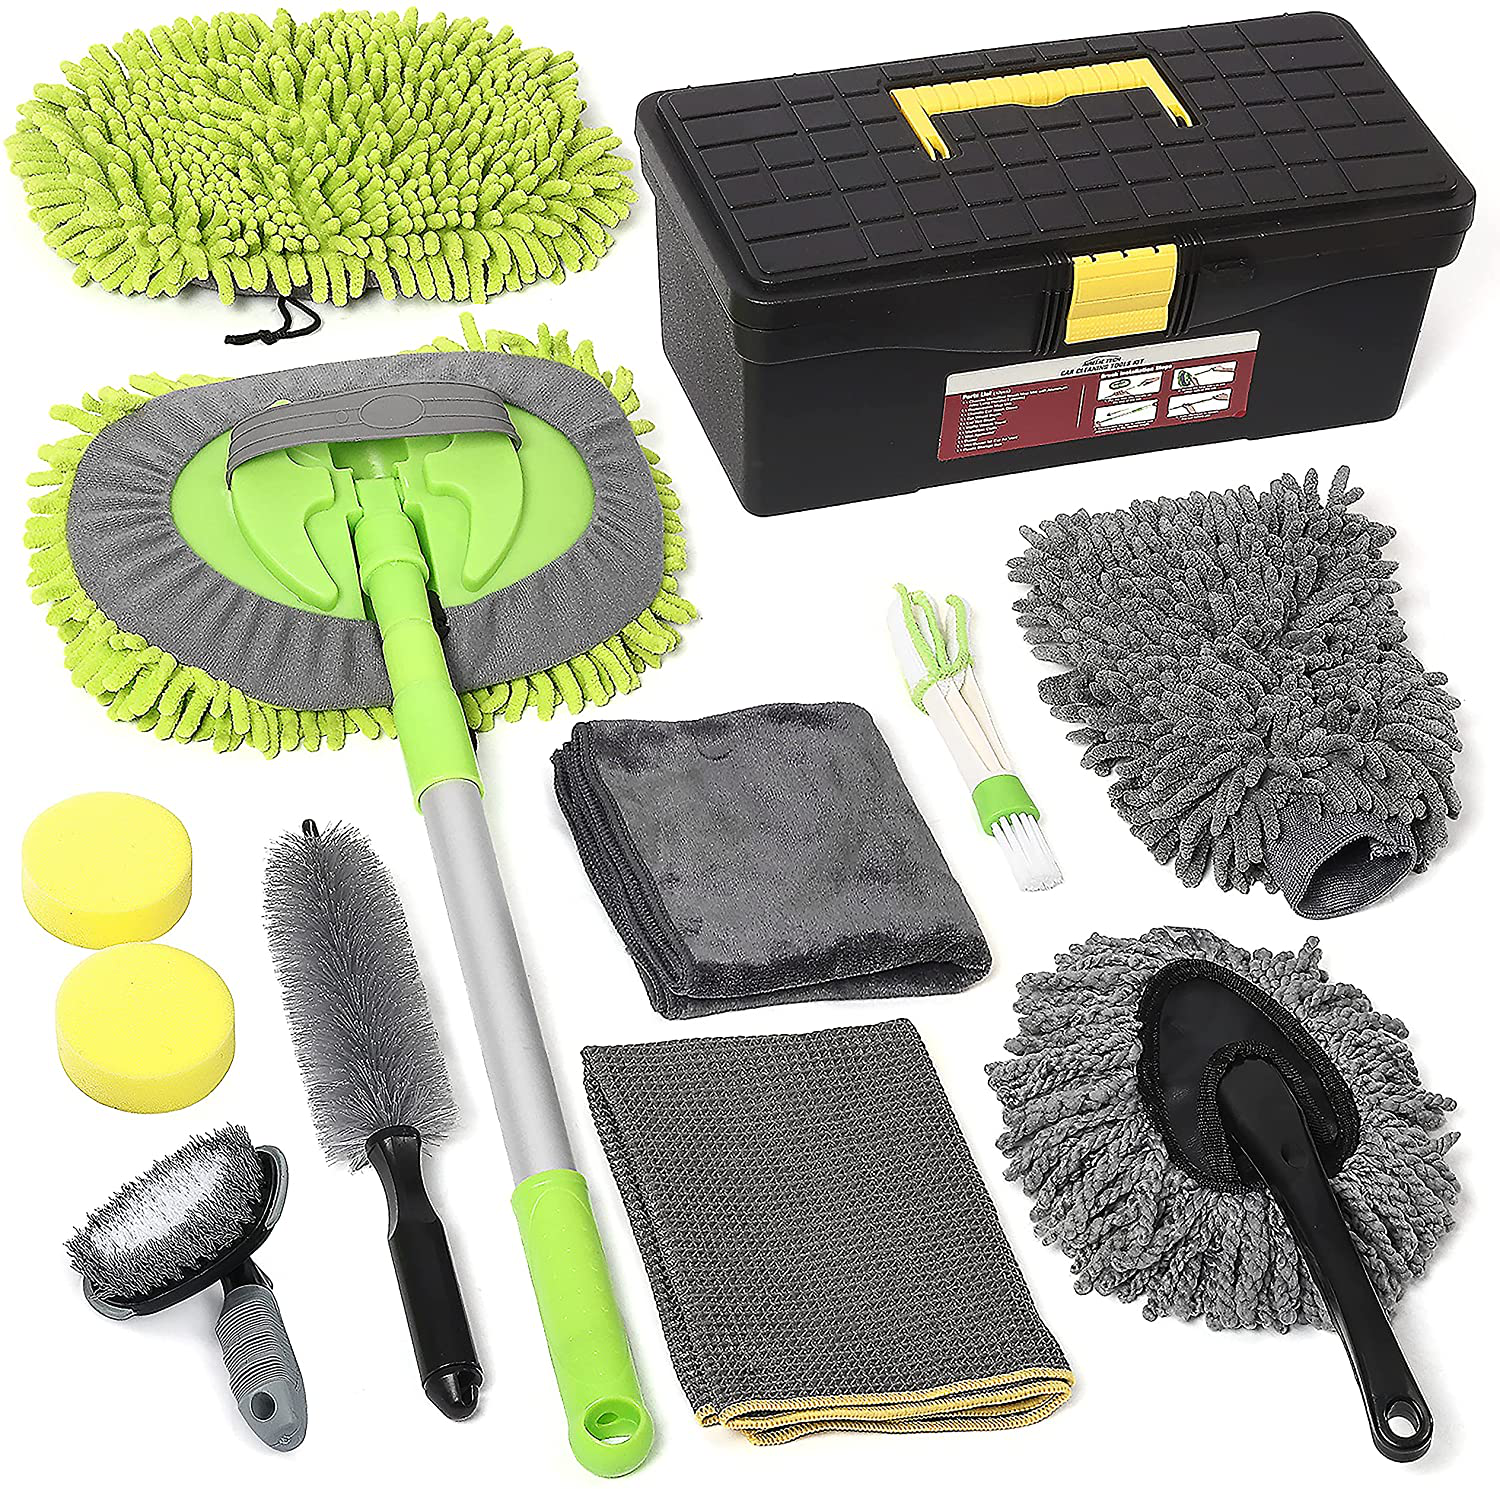 AURELIO TECH 12 Pcs Car Cleaning Kit | Car Wash Kit with Bucket, Brush with 43'' Long Handle, Car Wash Mitt Microfiber Towels Storage Box for Exterior and Interior Detailing